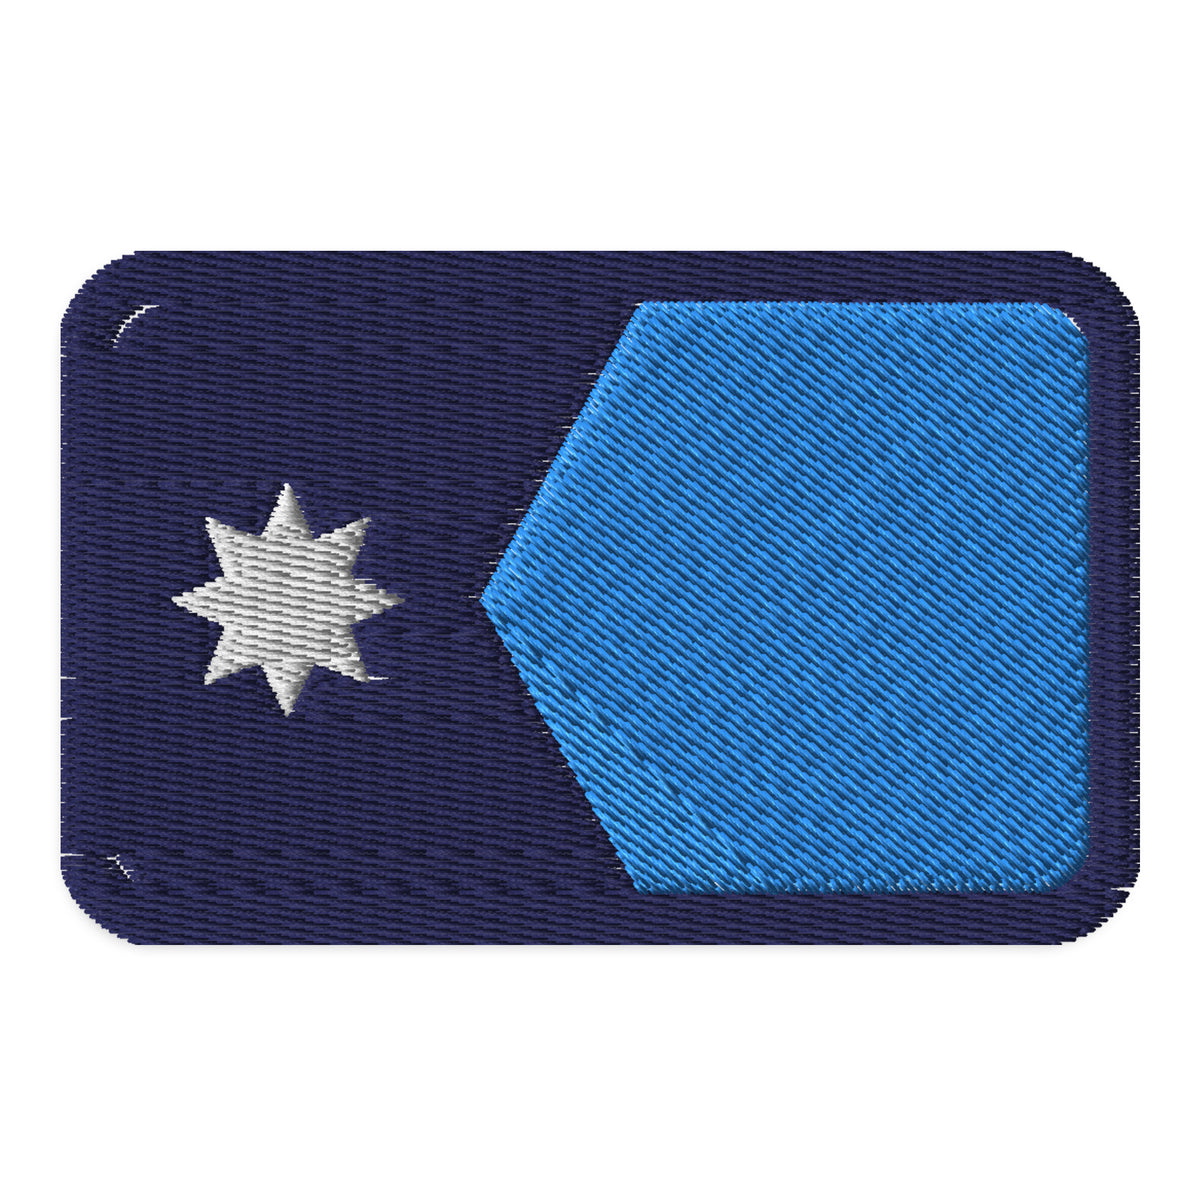 Minnesota Flag Embroidered Patche